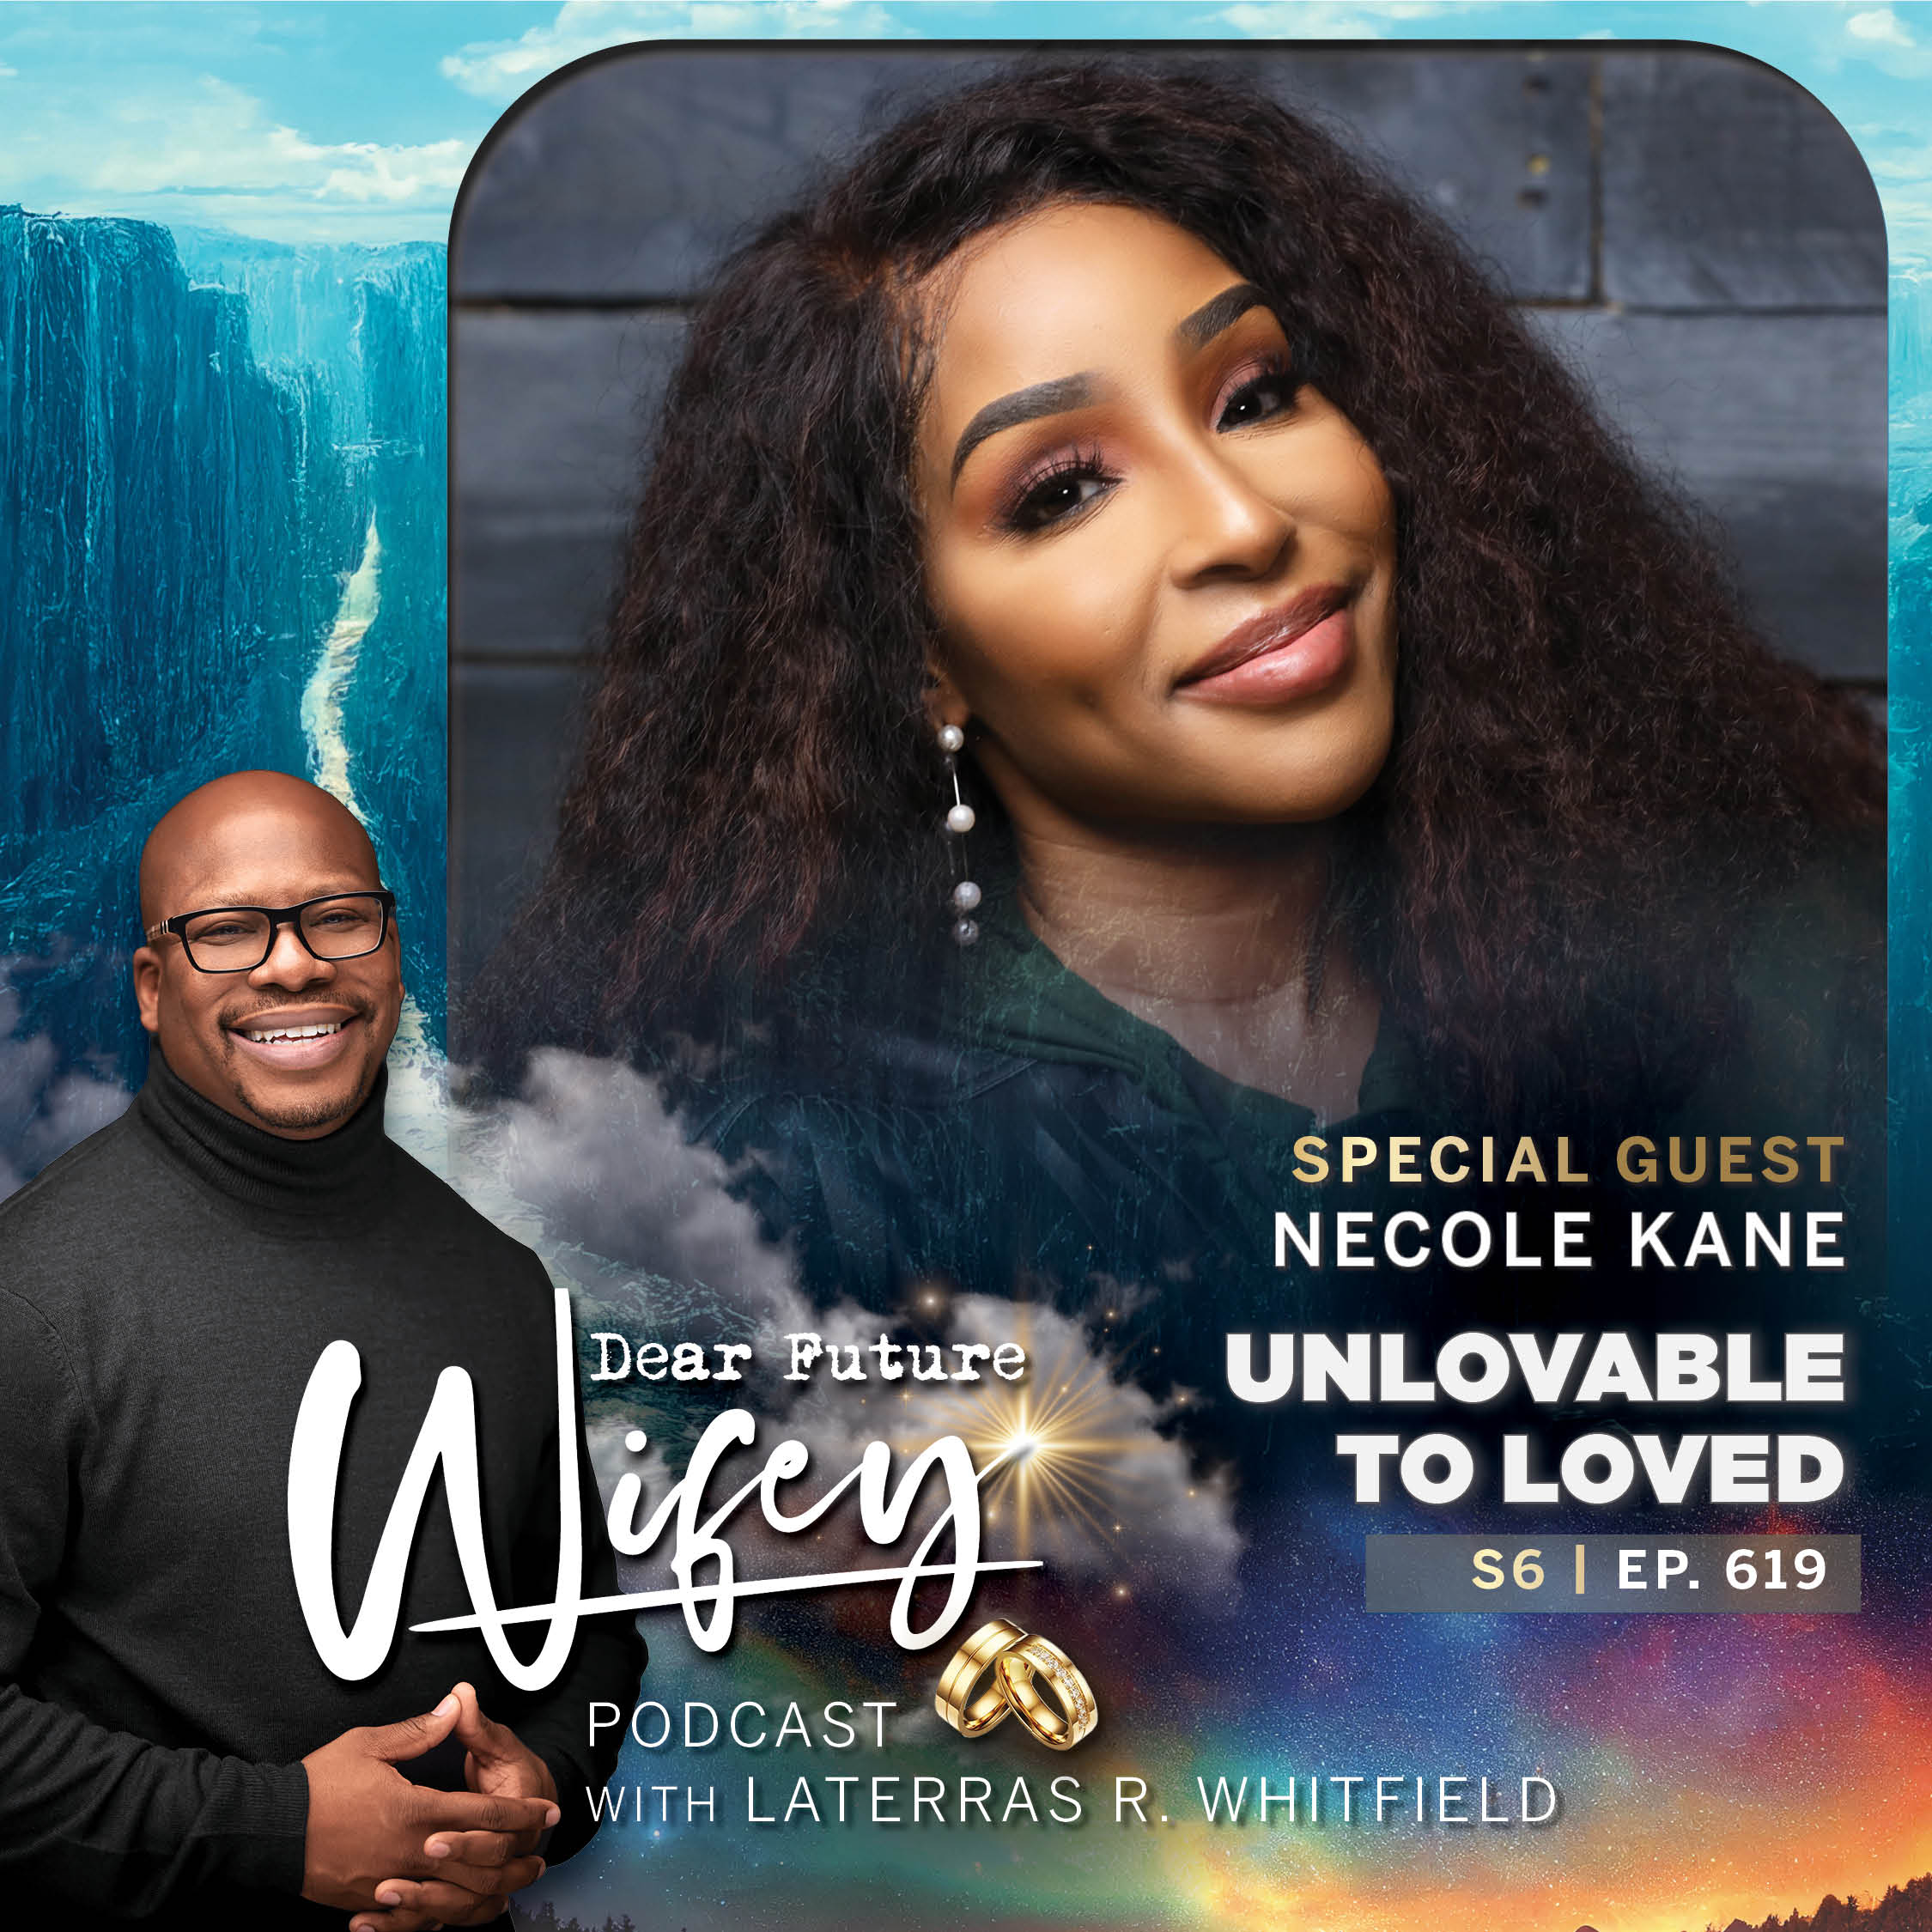 Unlovable to Loved (Guest: Necole Kane)